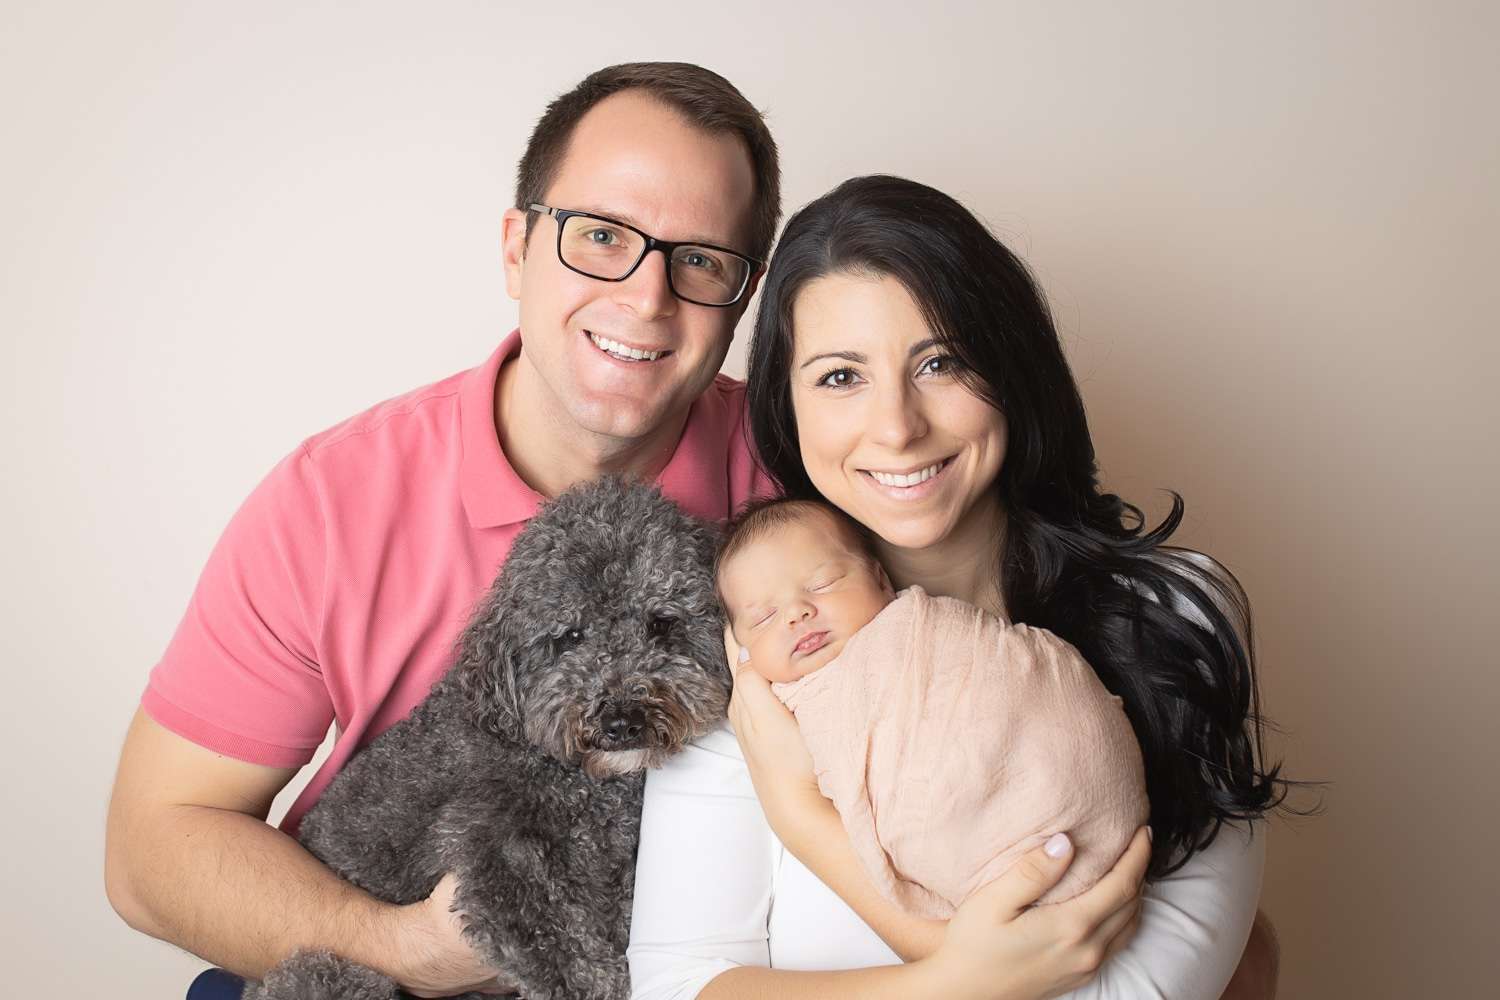 newborn photographer in rochester ny captures newborn baby girl sleeping in her parents' arms